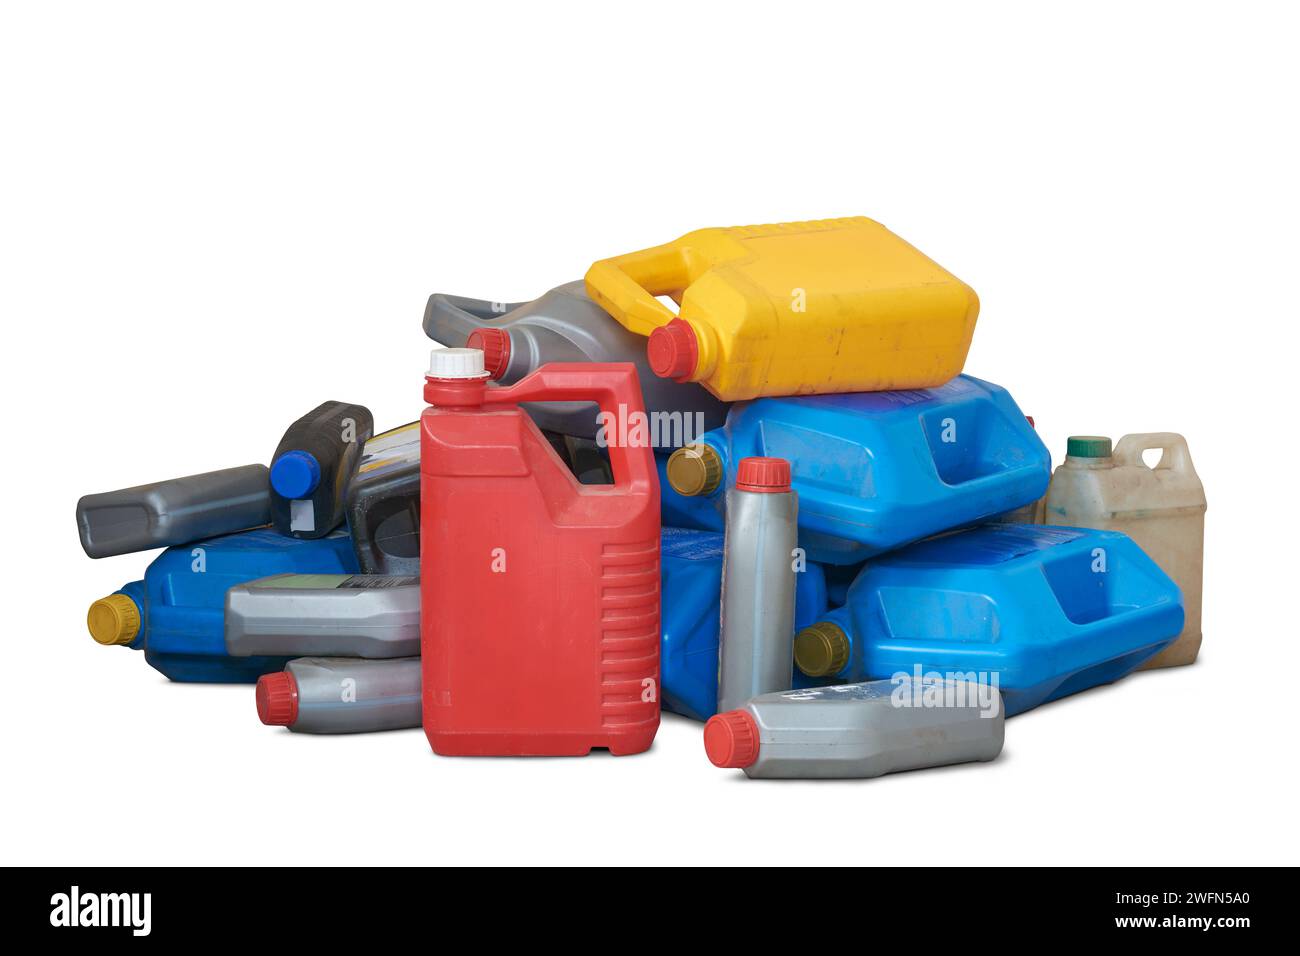 pile of old used plastic oil cans, motor or engine oil chemical gallon for recycle, various sizes and colors of empty waste containers or canisters Stock Photo